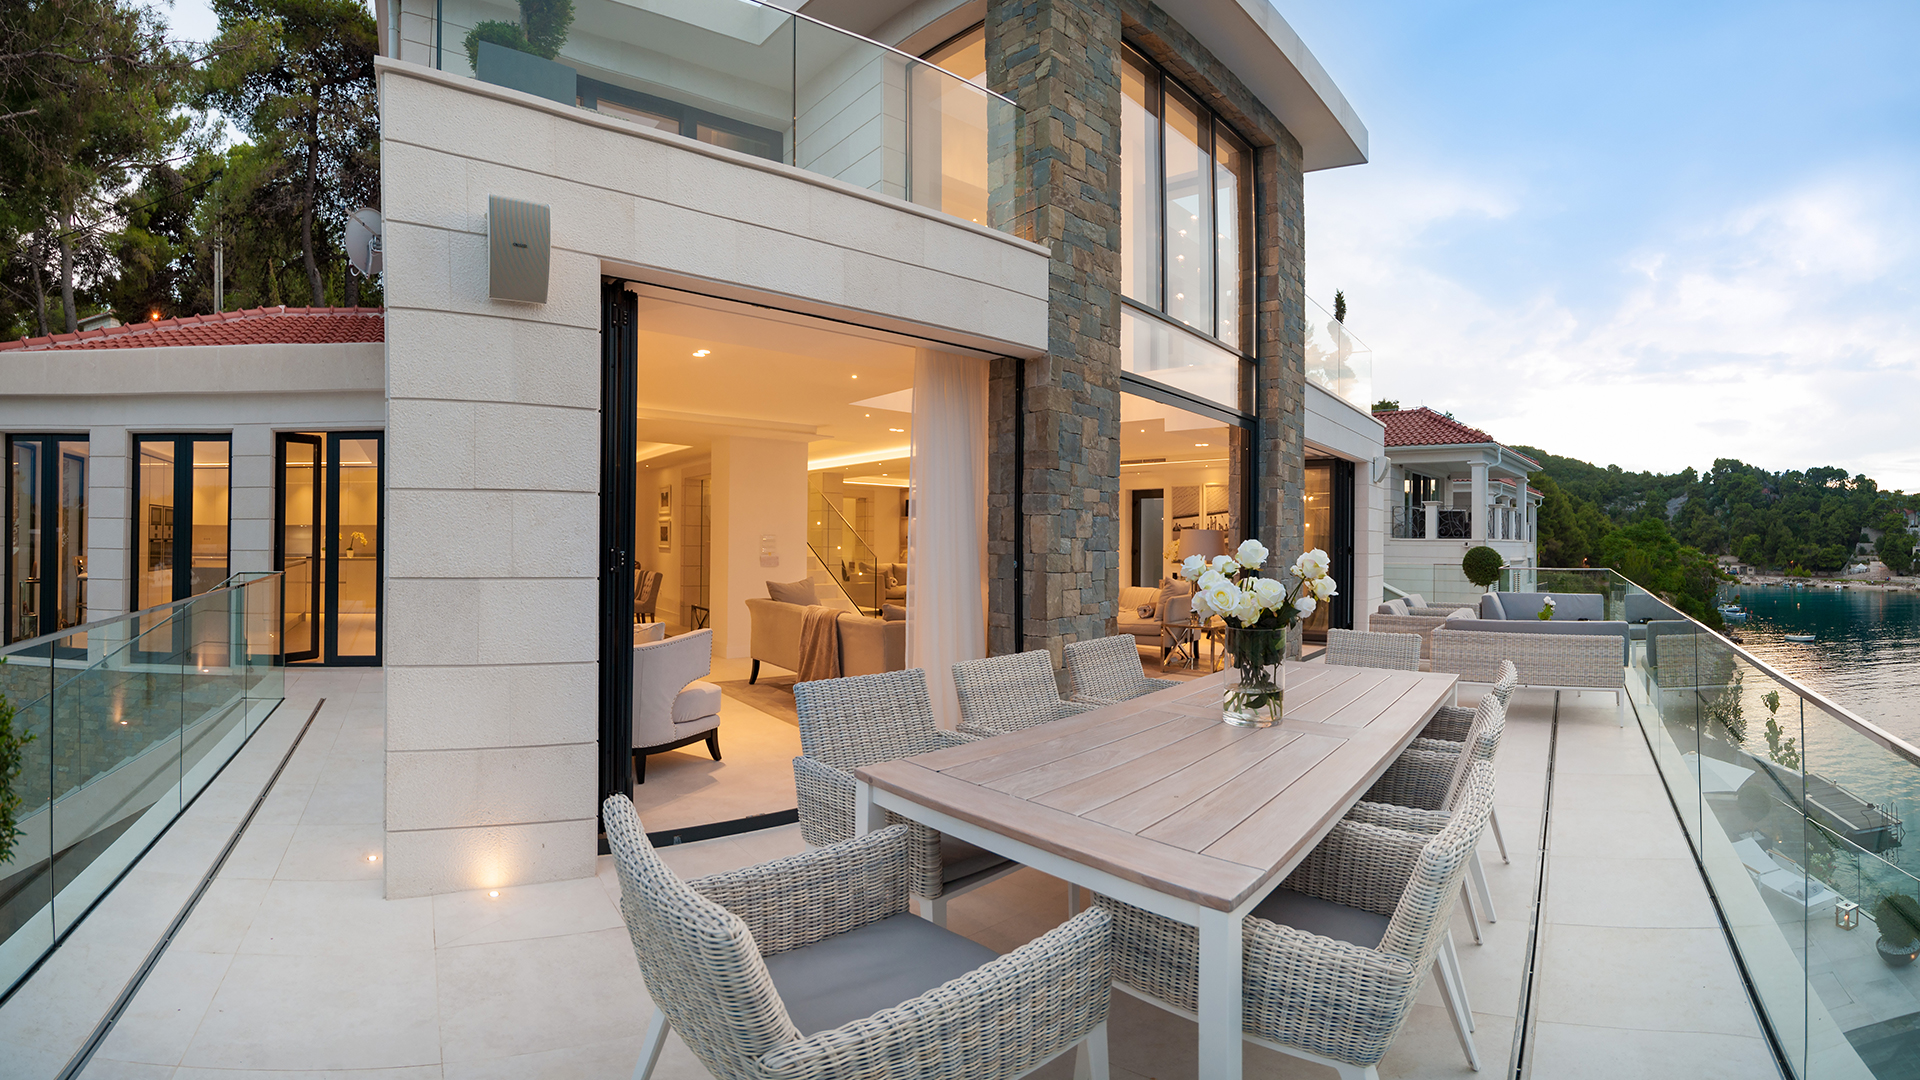 The large alfresco dining area in front of the stone luxury home.